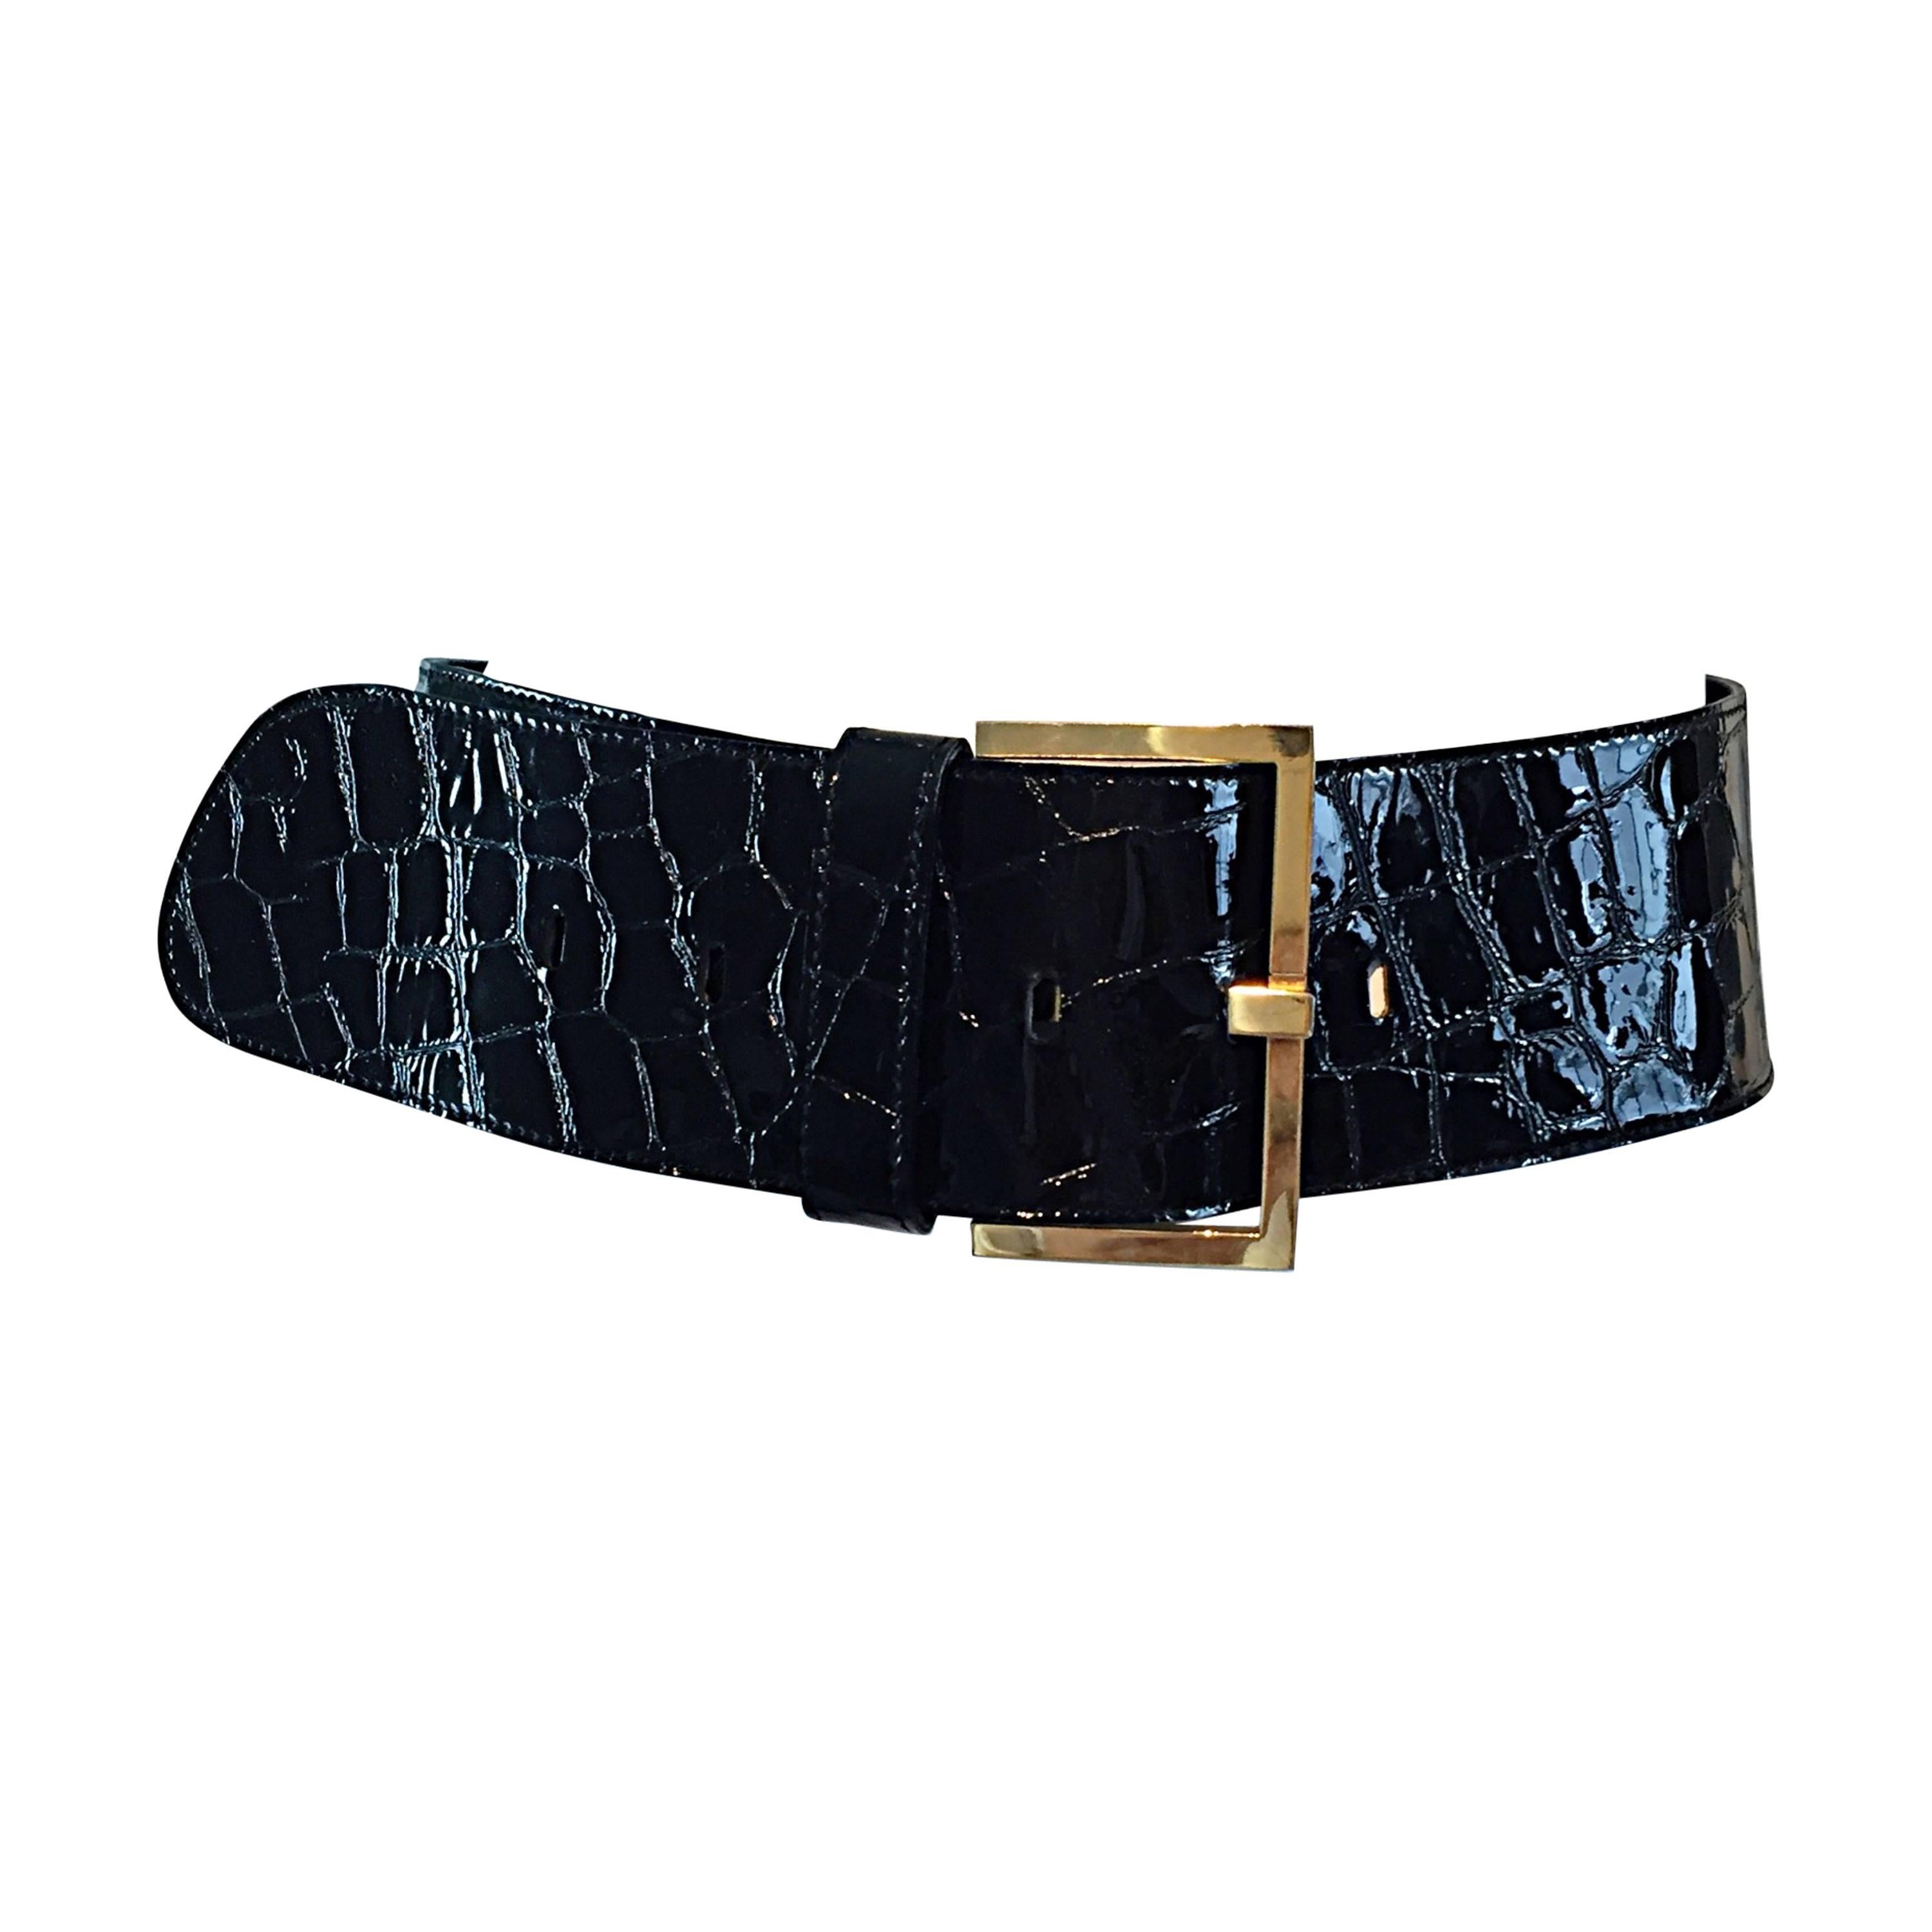 ESCADA 80's Leather Belt With Metal Accents Square 